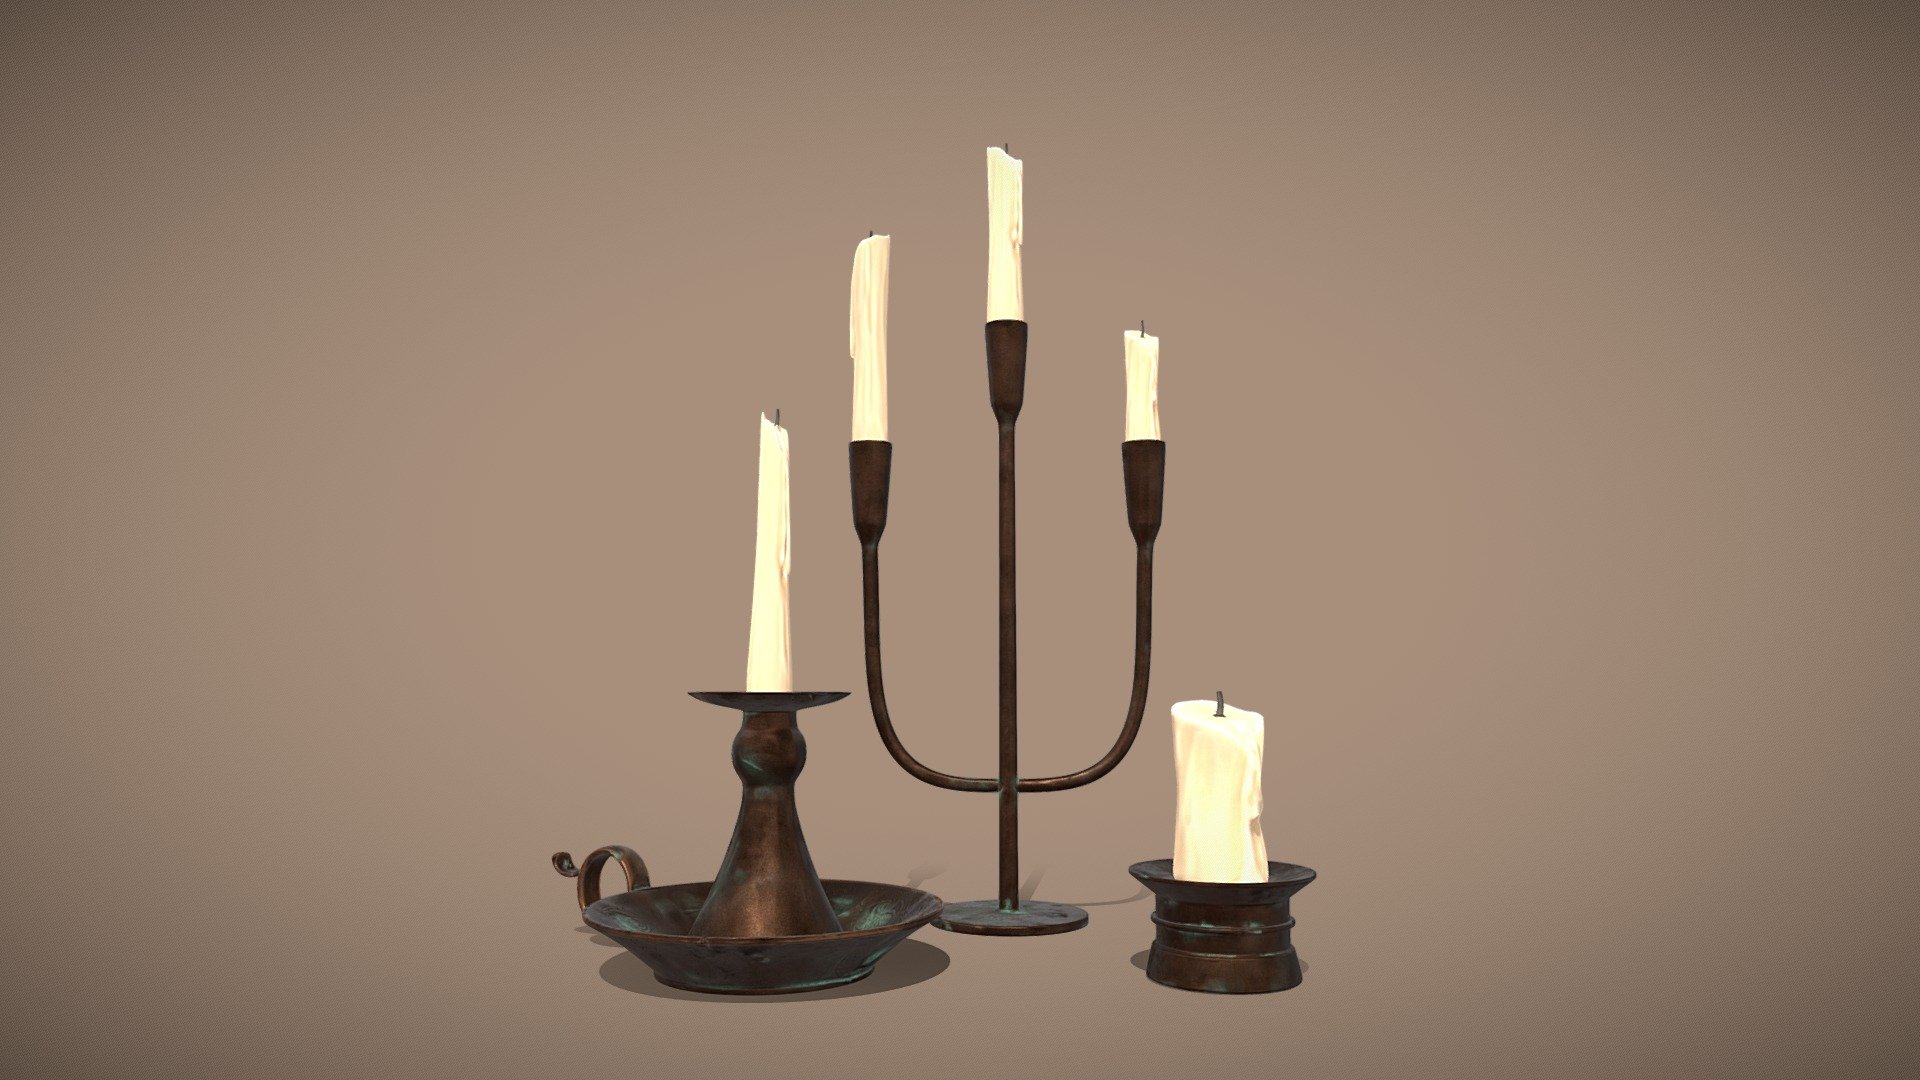 Medieval Candle Holders for Video Games
Smooth Poly Version
2K Textures - Medieval Candle Holders - Buy Royalty Free 3D model by Stefano Vietina (@stefanovietina) 3d model